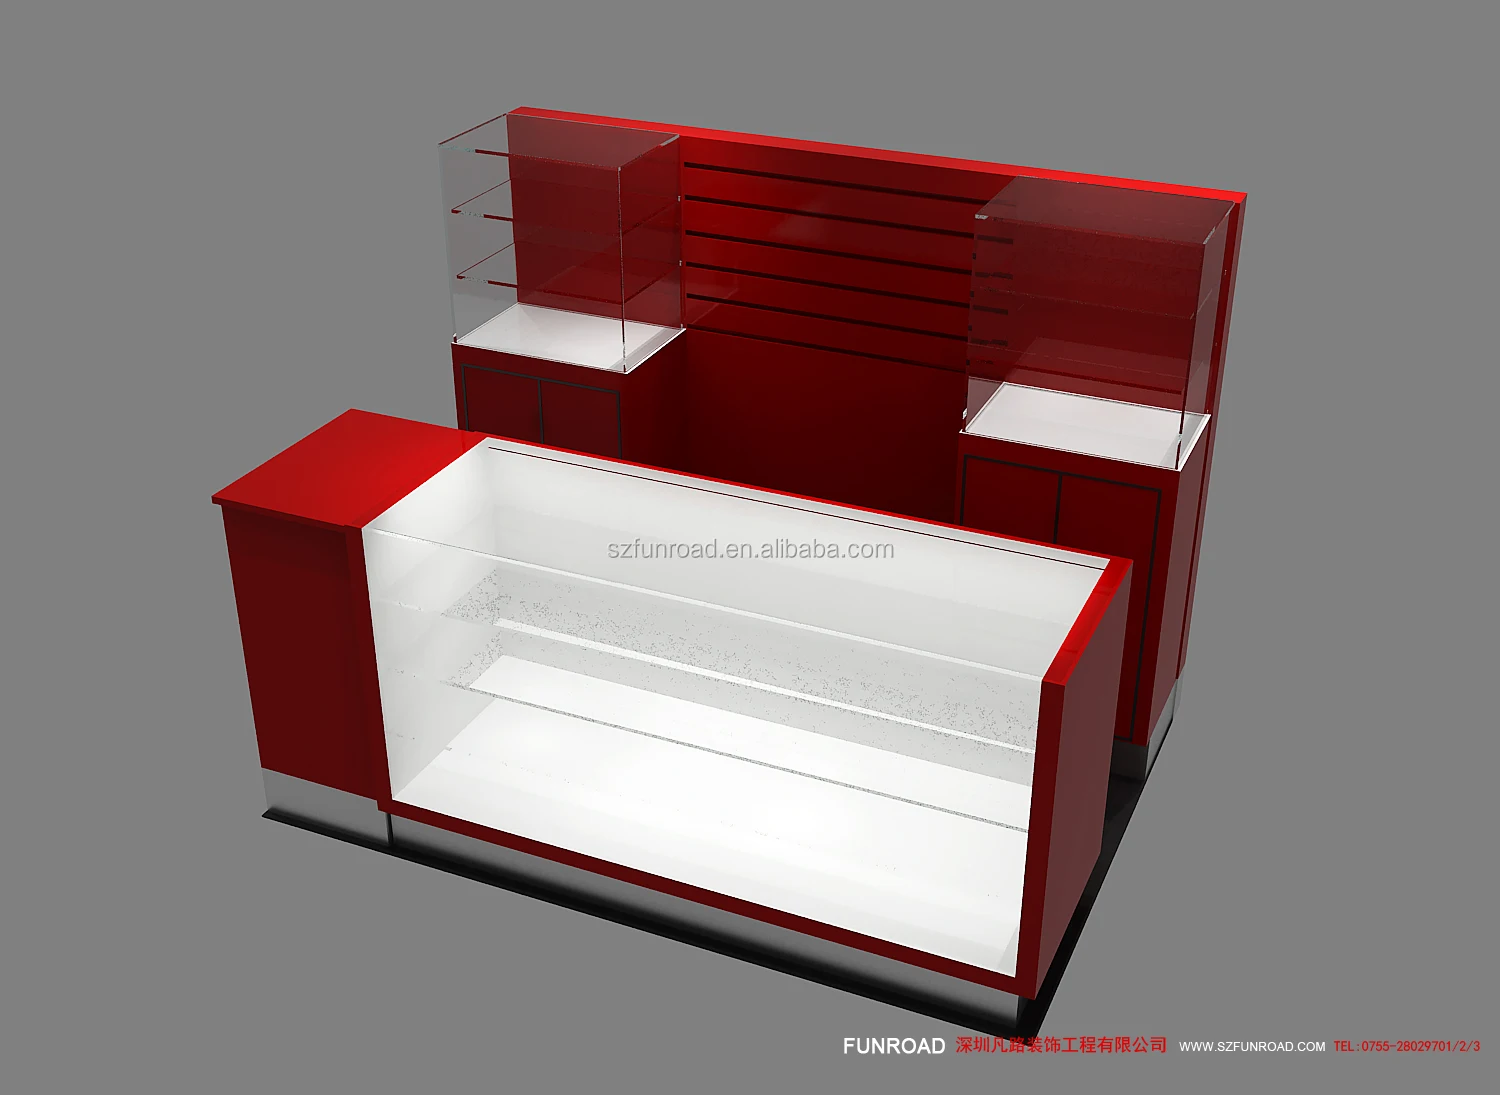 Fair price mall jewelry store display counter furniture necklace display kiosk for customized